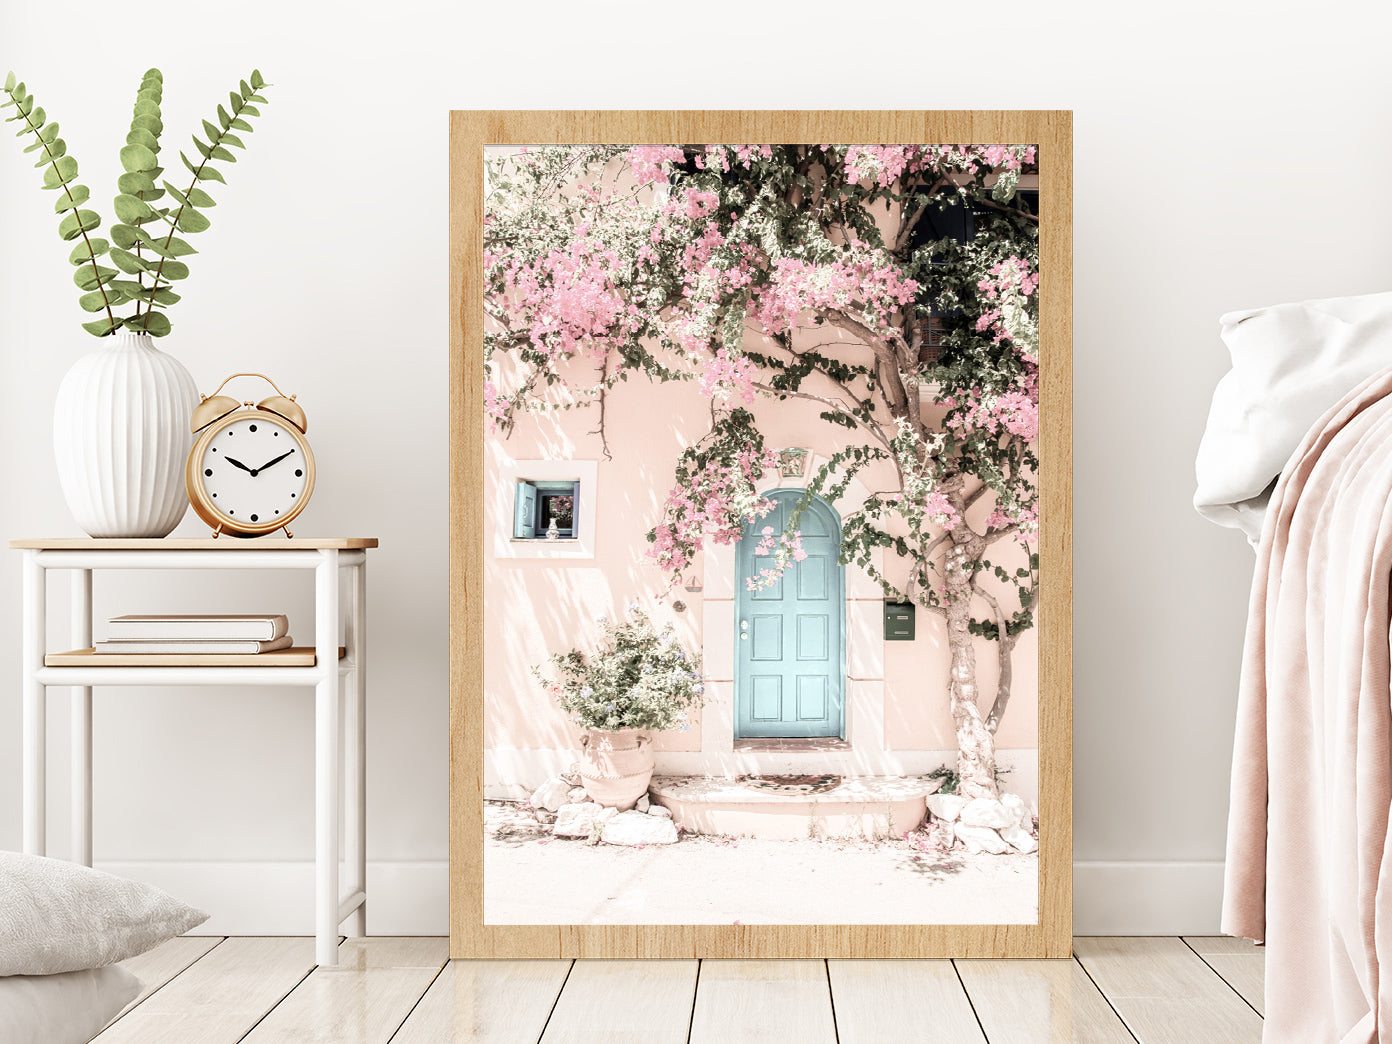 House & Flower Tree Faded Photograph Glass Framed Wall Art, Ready to Hang Quality Print Without White Border Oak